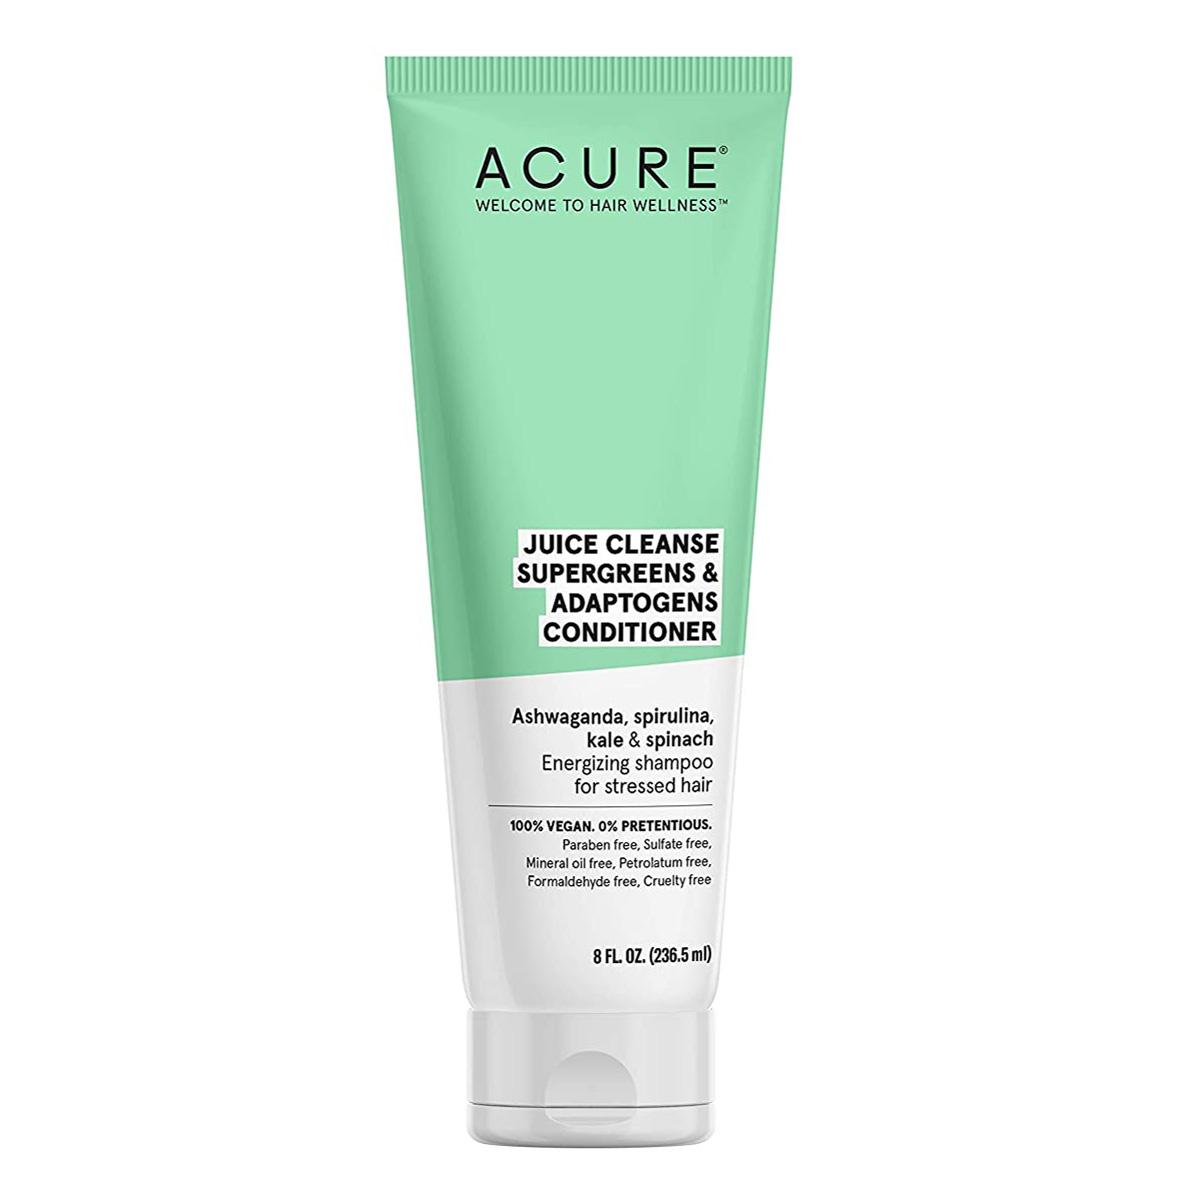 8oz Acure Juice Cleanse Supergreens Hair Conditioner for $4 Shipped